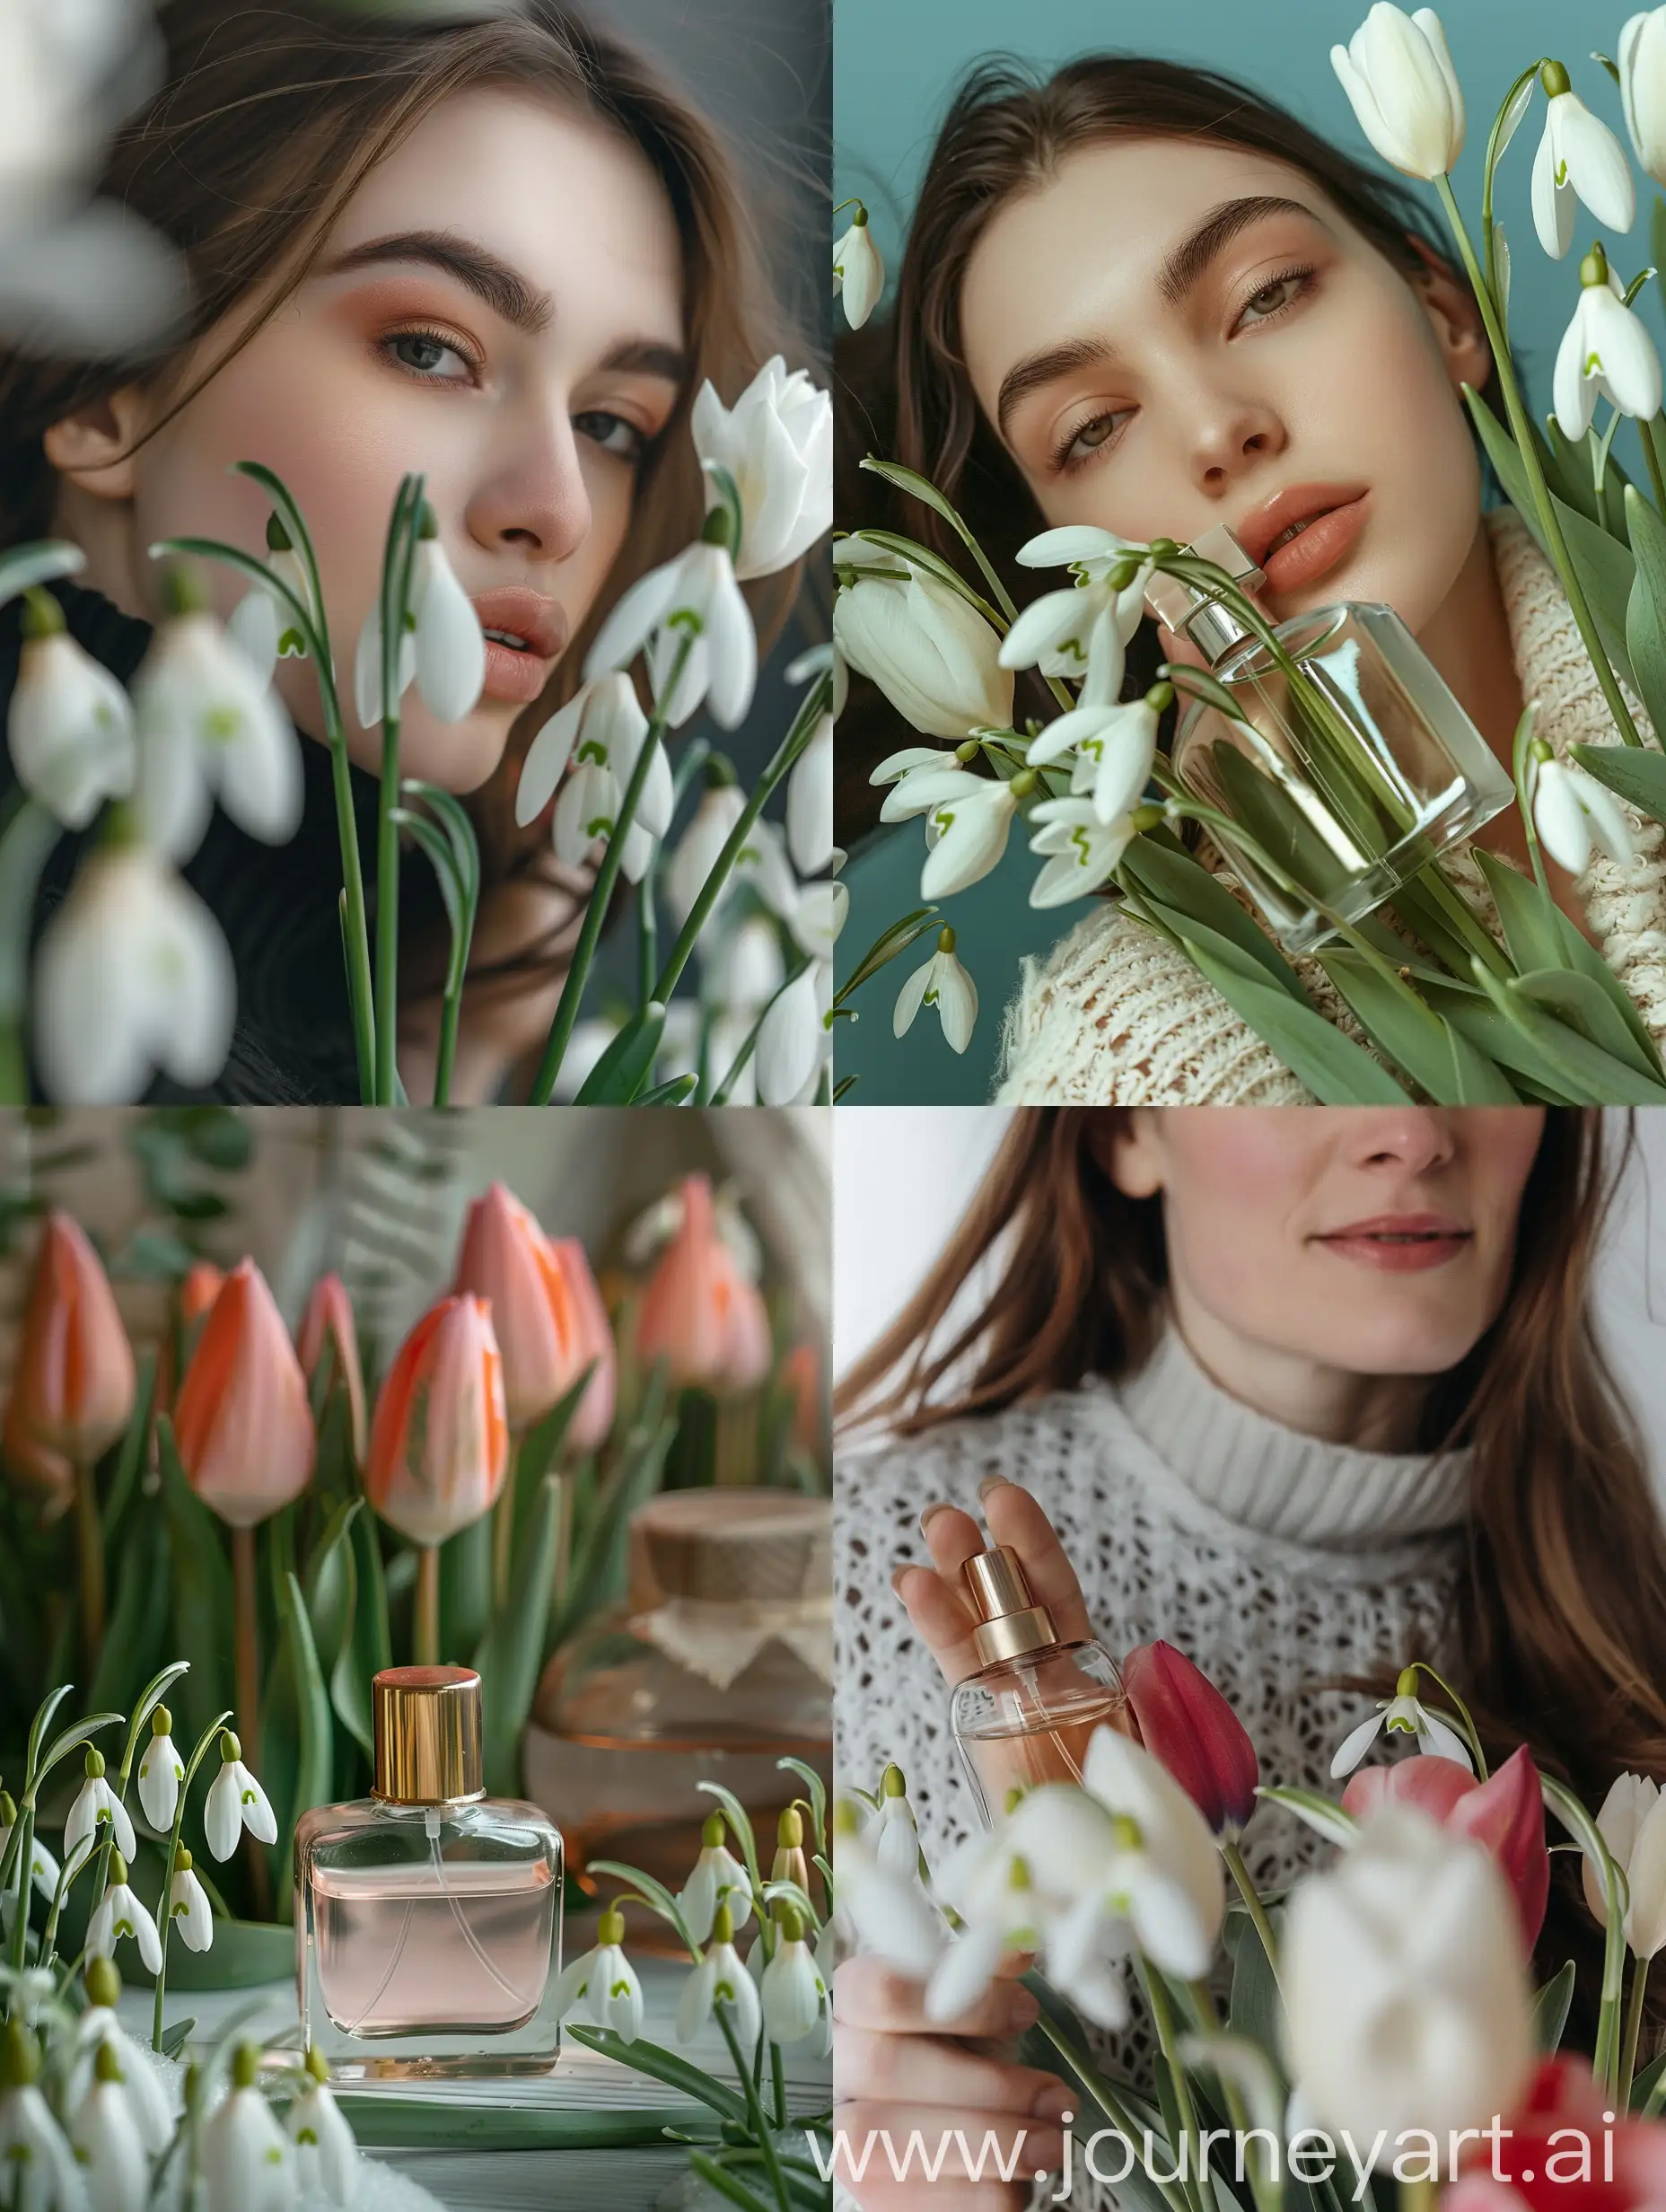 Woman-Enjoying-Fragrant-Tulips-and-Snowdrops-in-Snowy-Landscape